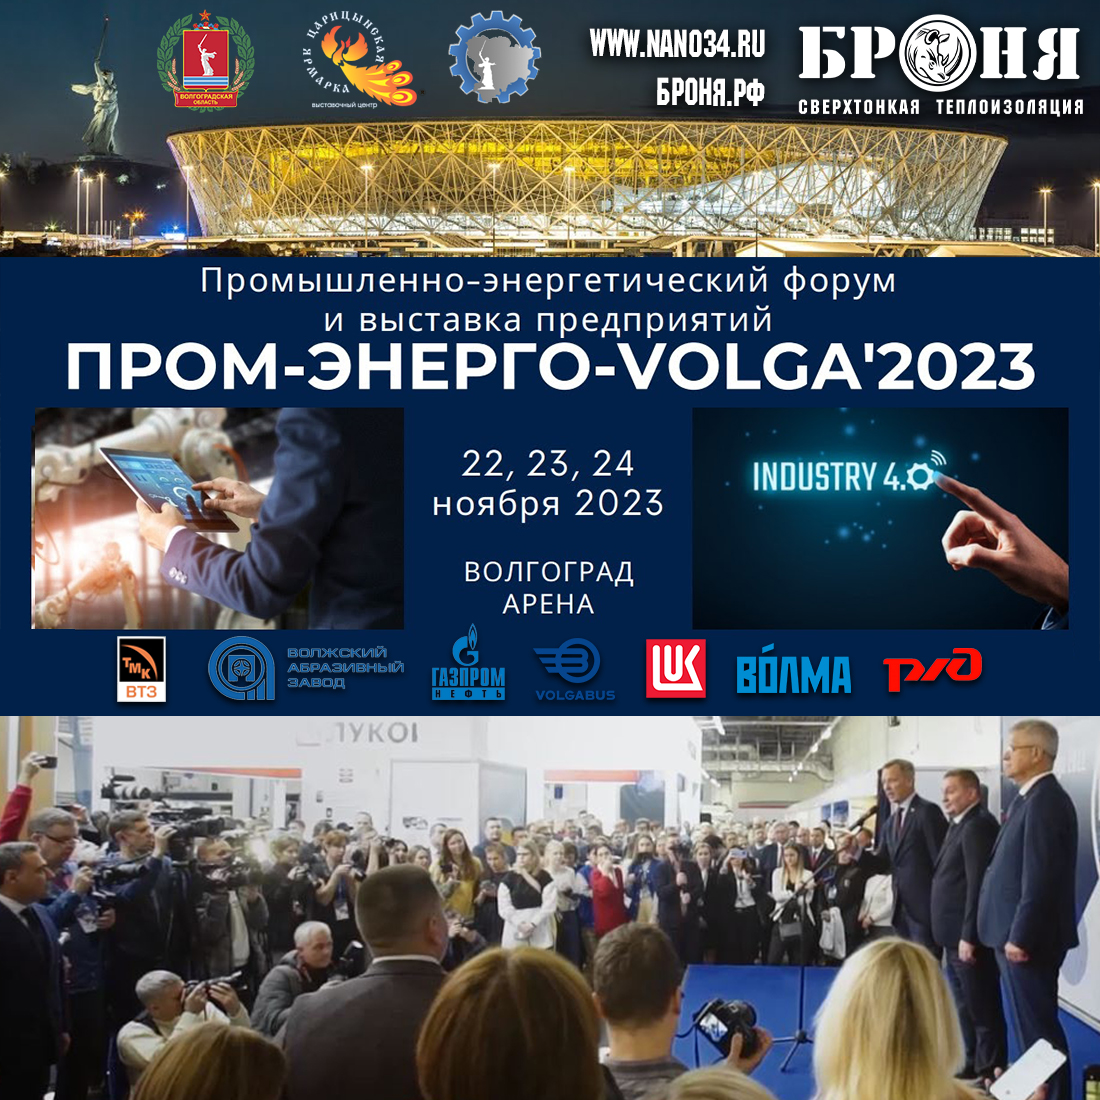 Important! We would like to invite Everyone to visit the Bronya exhibition stand at the Interregional Industrial and Energy Forum "PROM-ENERGO-VOLGA" 2023"!